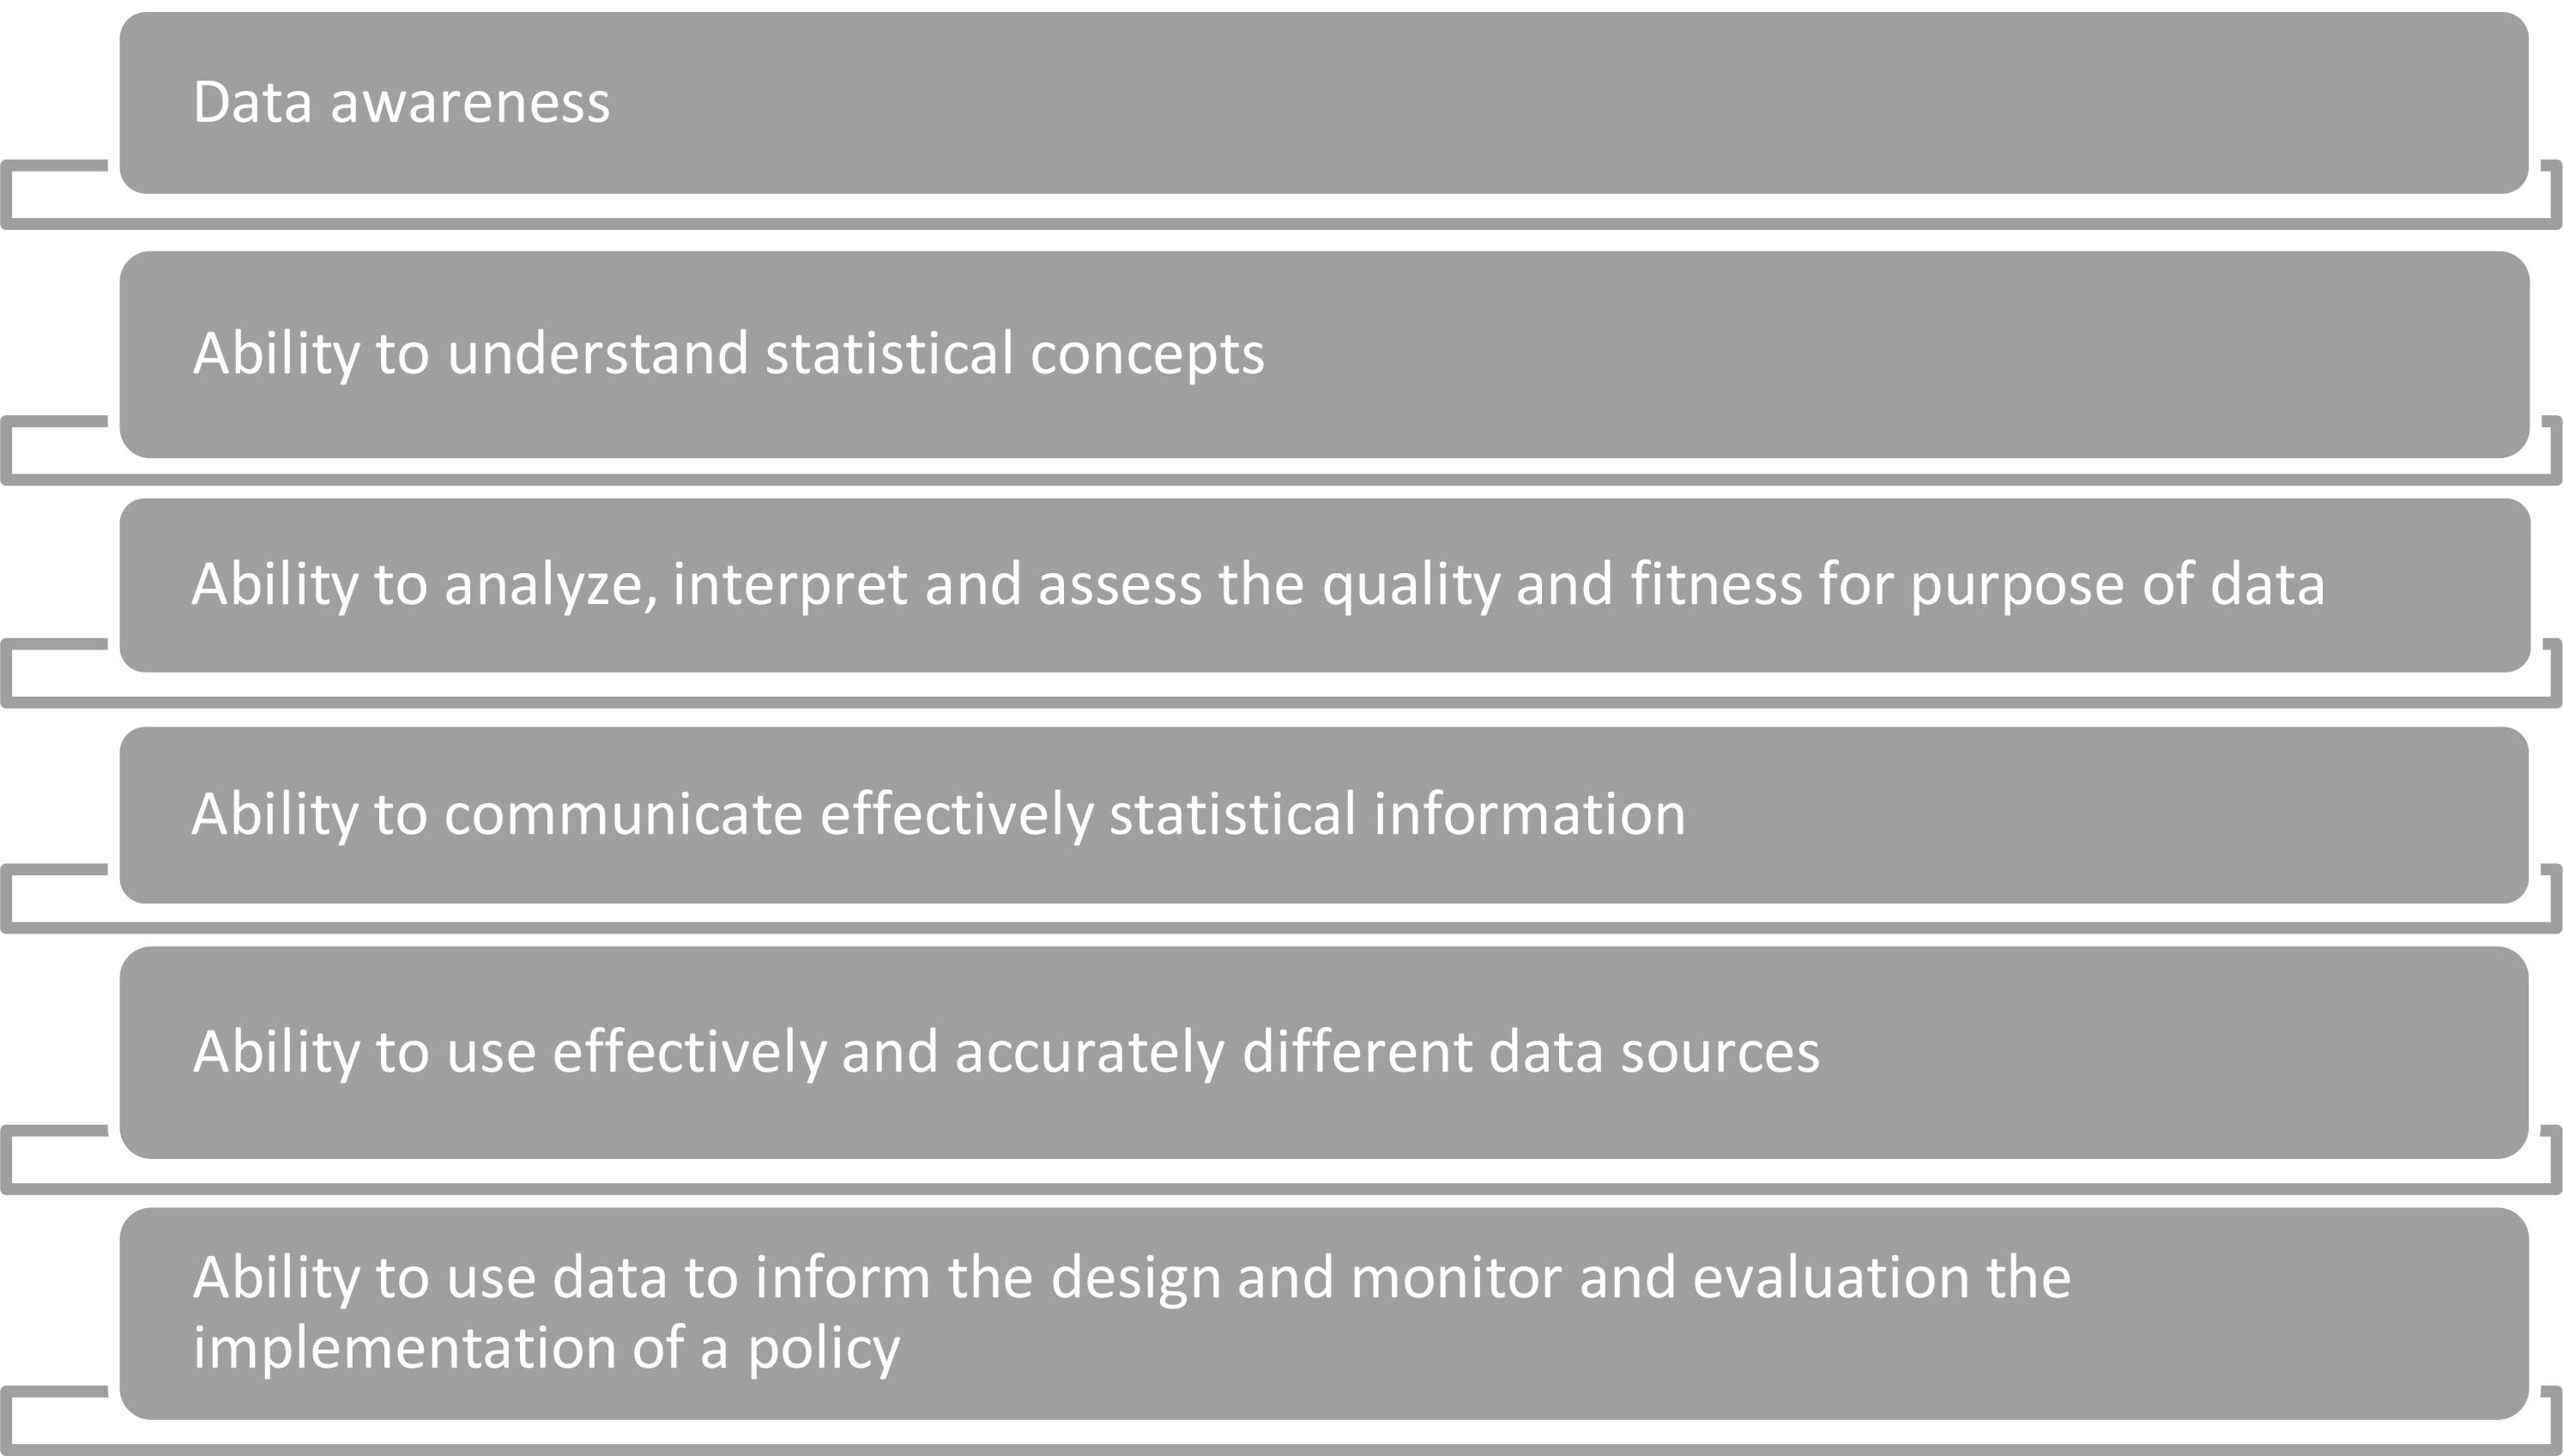 Core data competencies for policy makers.